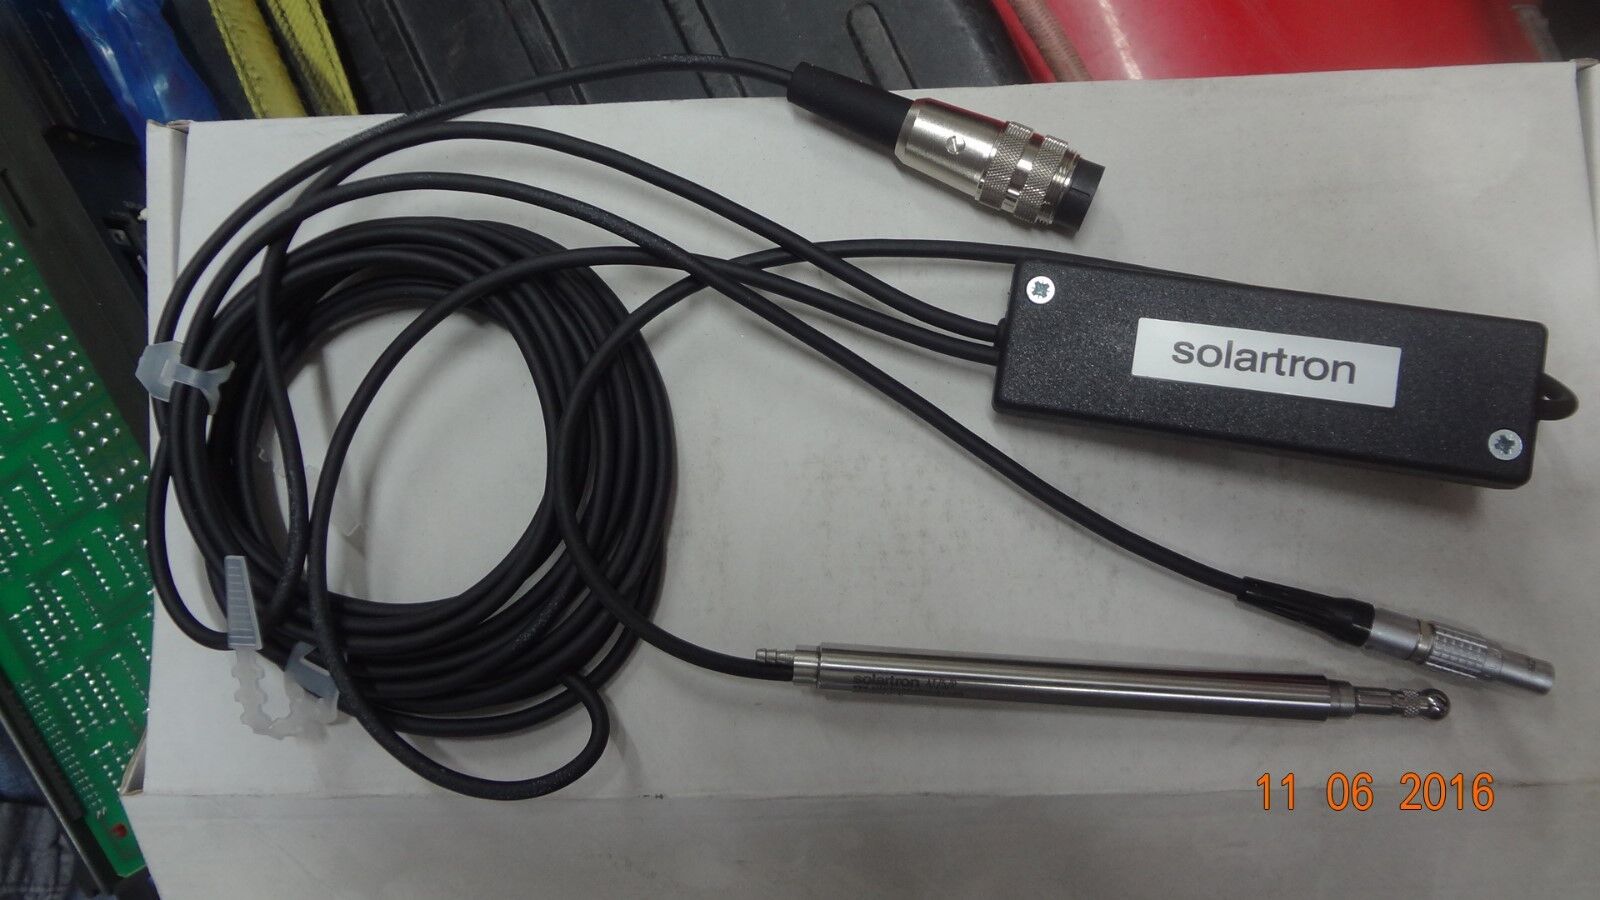 Solartron AT/5/P pneumatic Probe Transducer (price reduced)